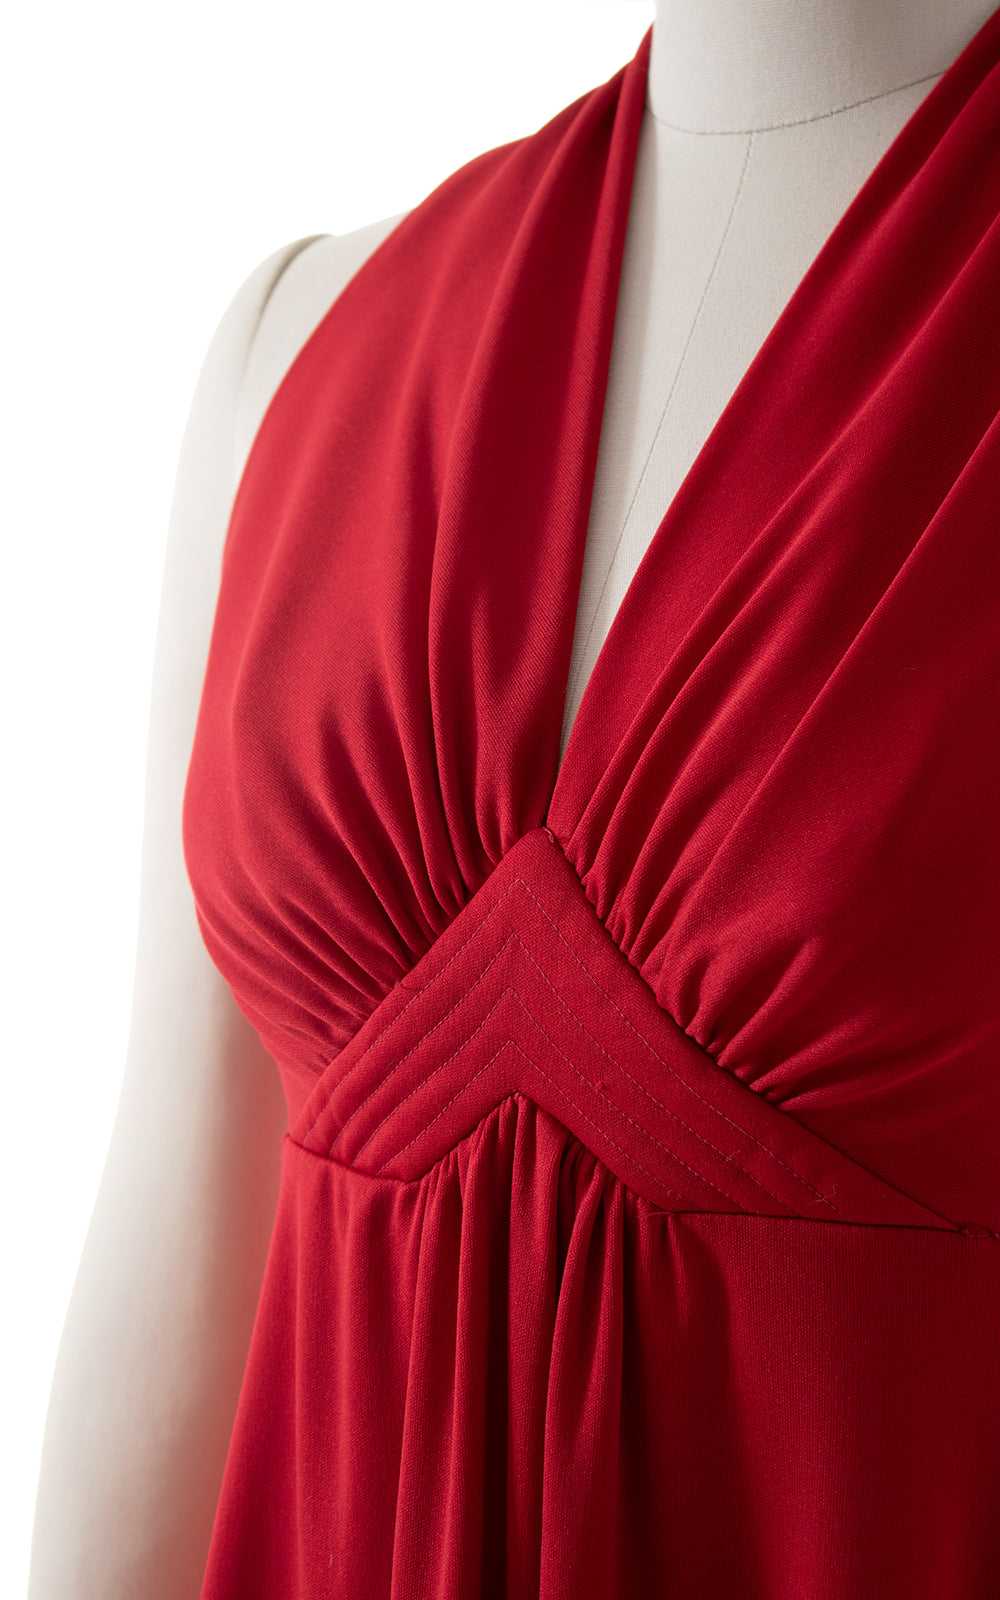 1970s Cabernet Red Maxi Dress | x-small/small - image 2